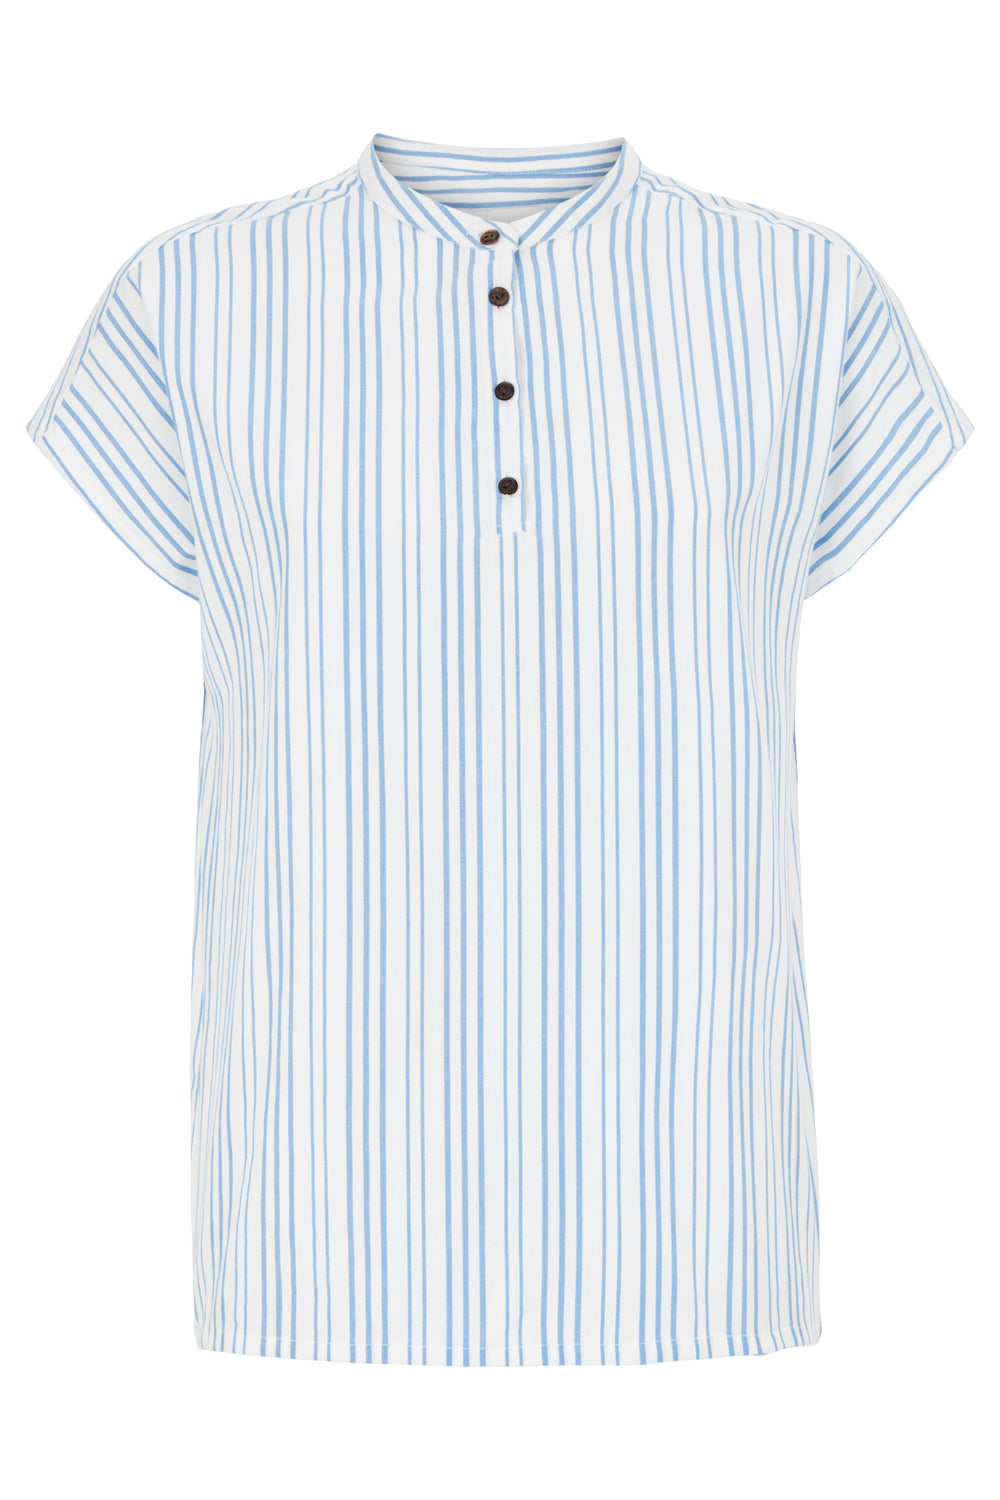 coby striped top, blue - people tree